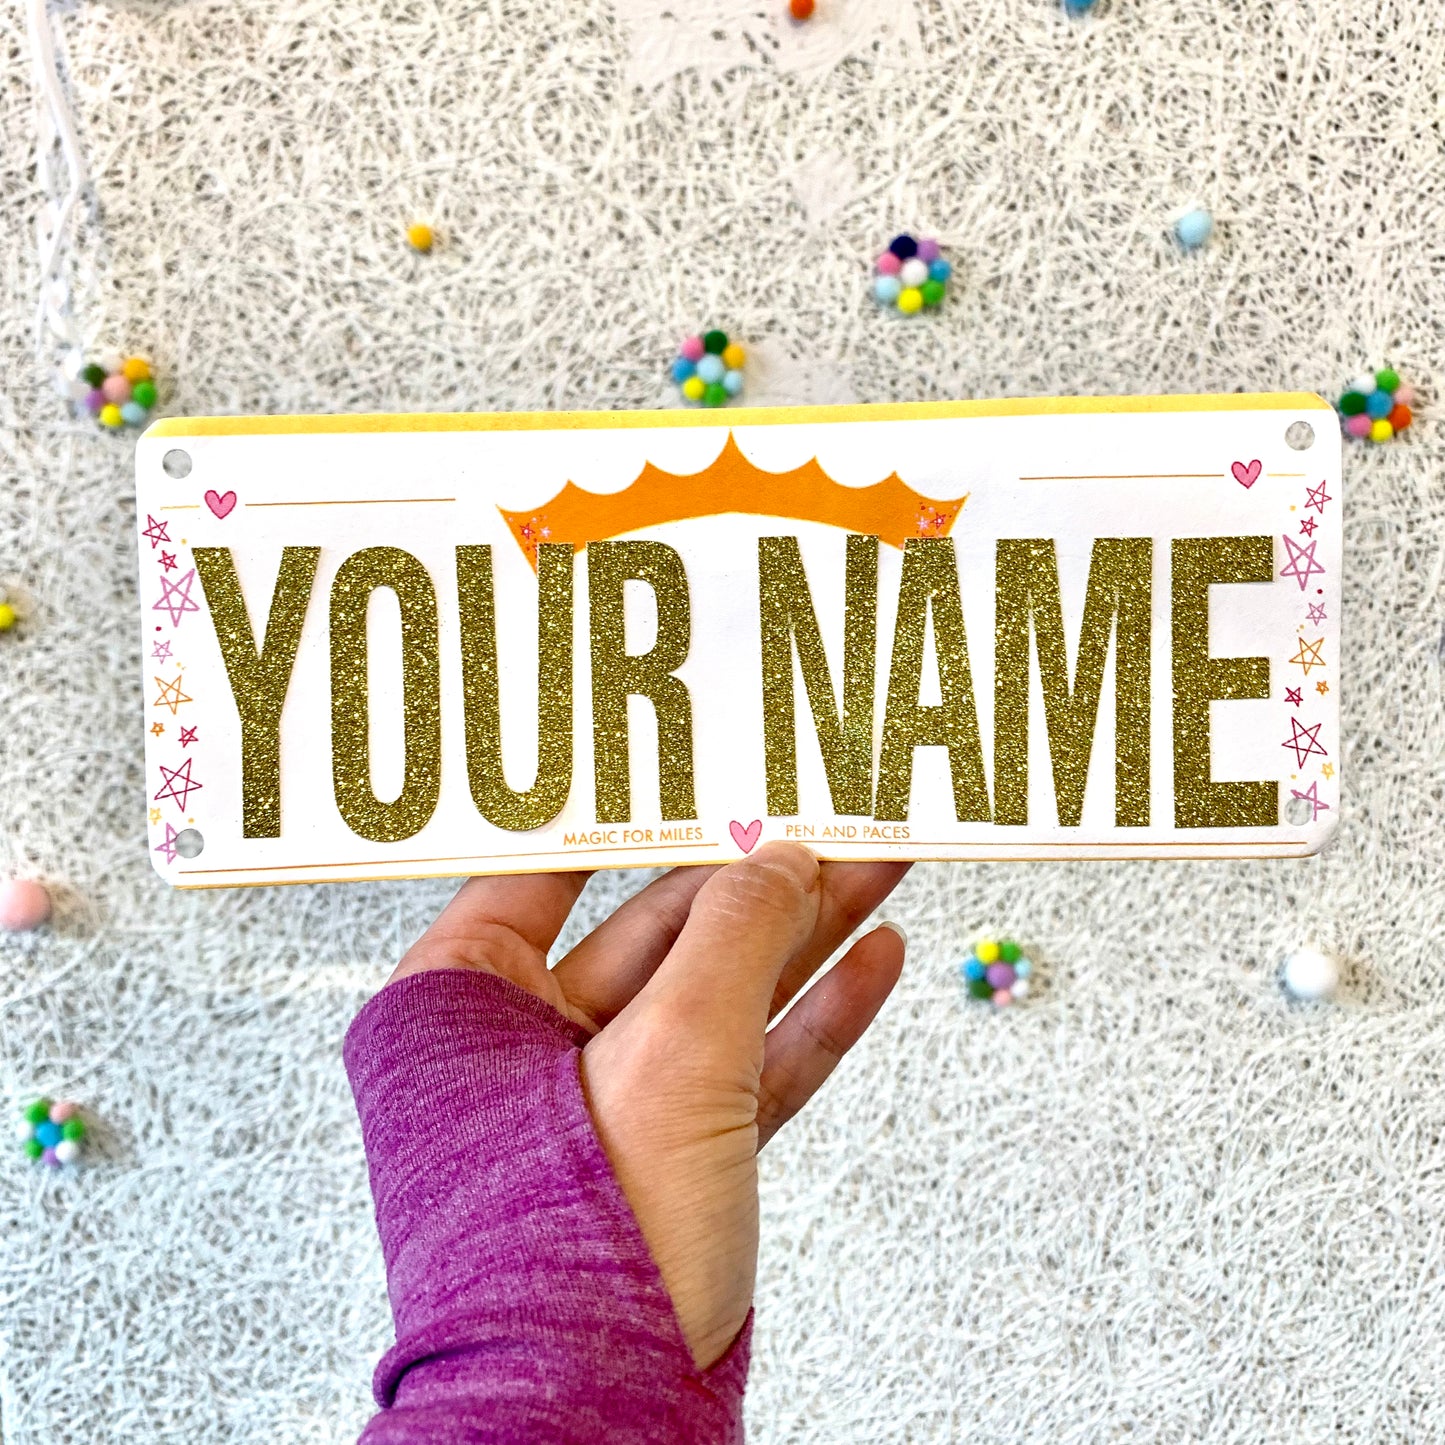 Magic for Miles Collaboration Yell my name race bib topper kit!